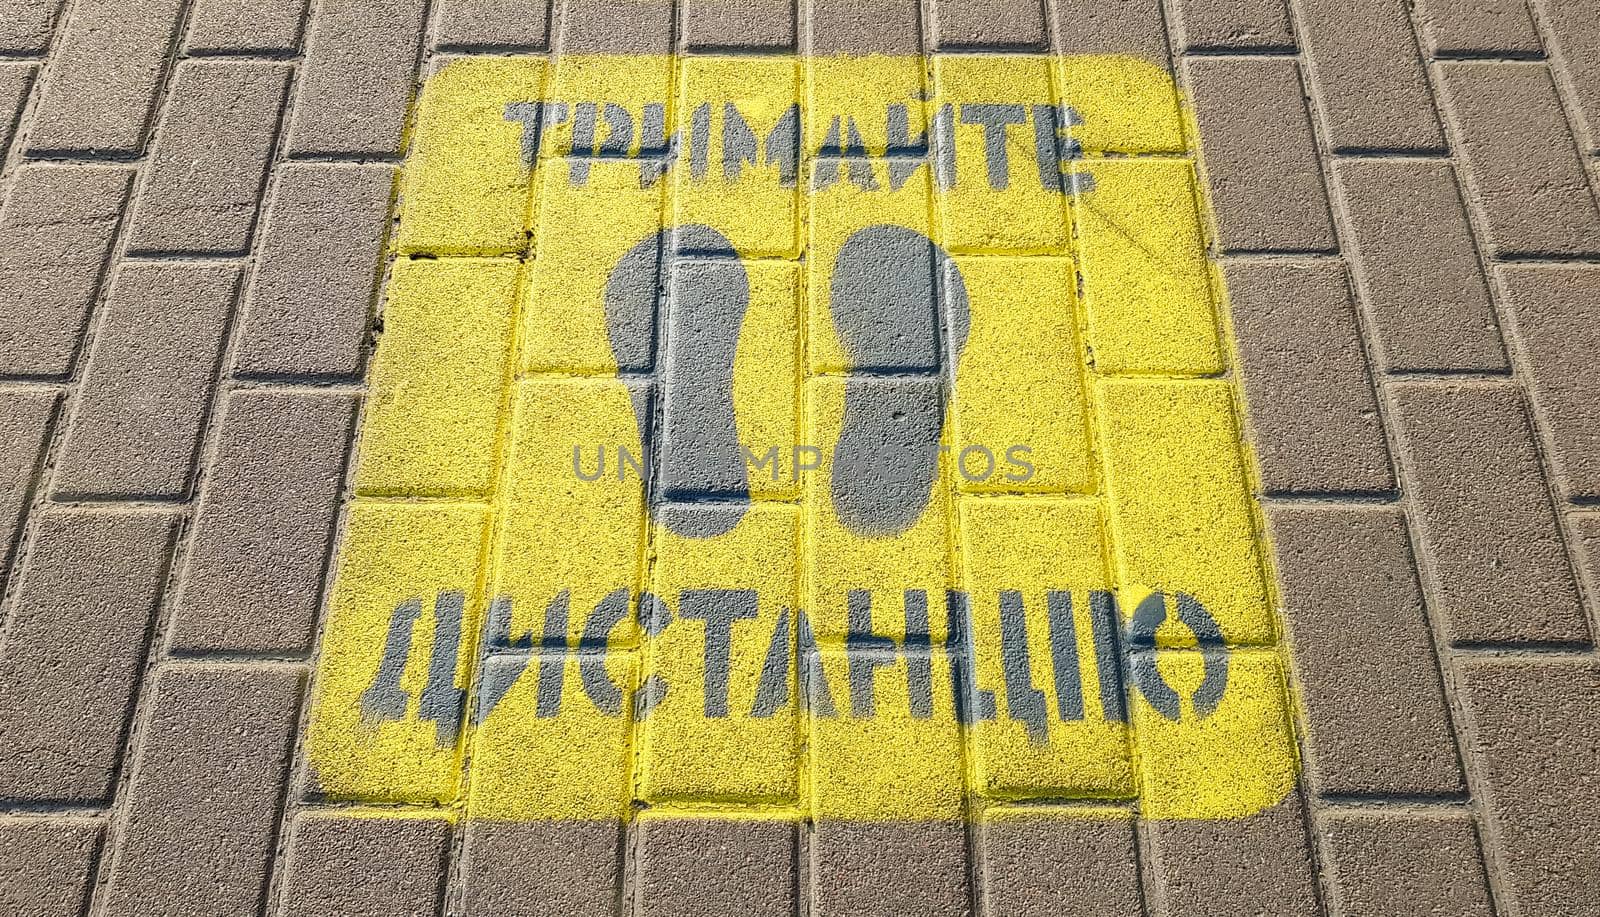 Ukraine, Kiev - April 23, 2020. Yellow sidewalk with the warning Keep your distance on the sidewalk. The text is in Ukrainian. Concept of maintaining social distance, quarantine or isolation.